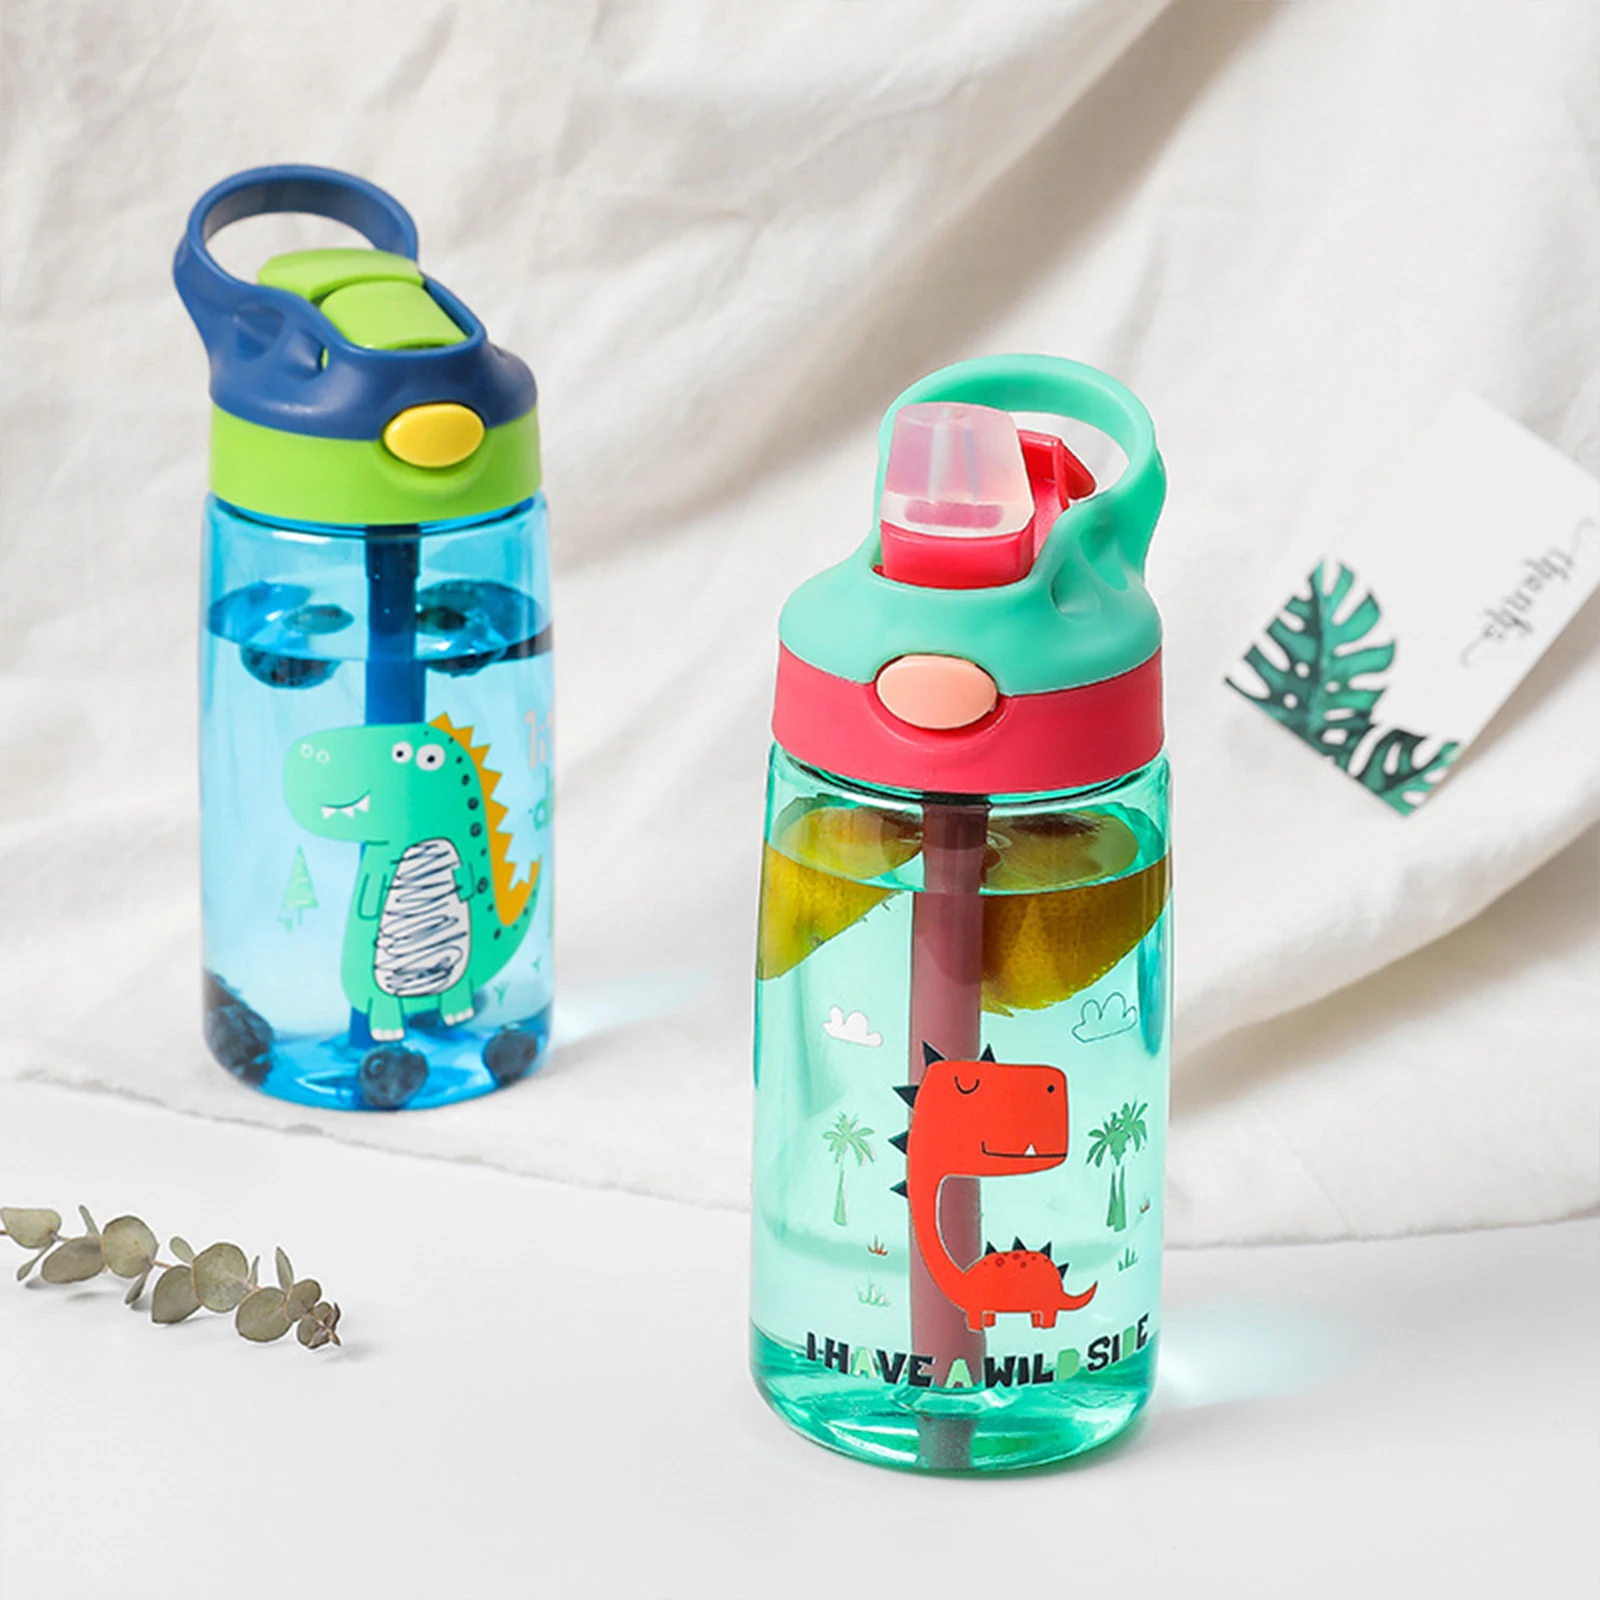 https://ae01.alicdn.com/kf/S03ac65bb0fec4c01a897f888481f58e4X/480ml-Child-Sports-Drink-Bottle-Leakproof-Material-Water-Bottle-With-Straw-Quality-Kid-Drinkware-Children-Water.jpg